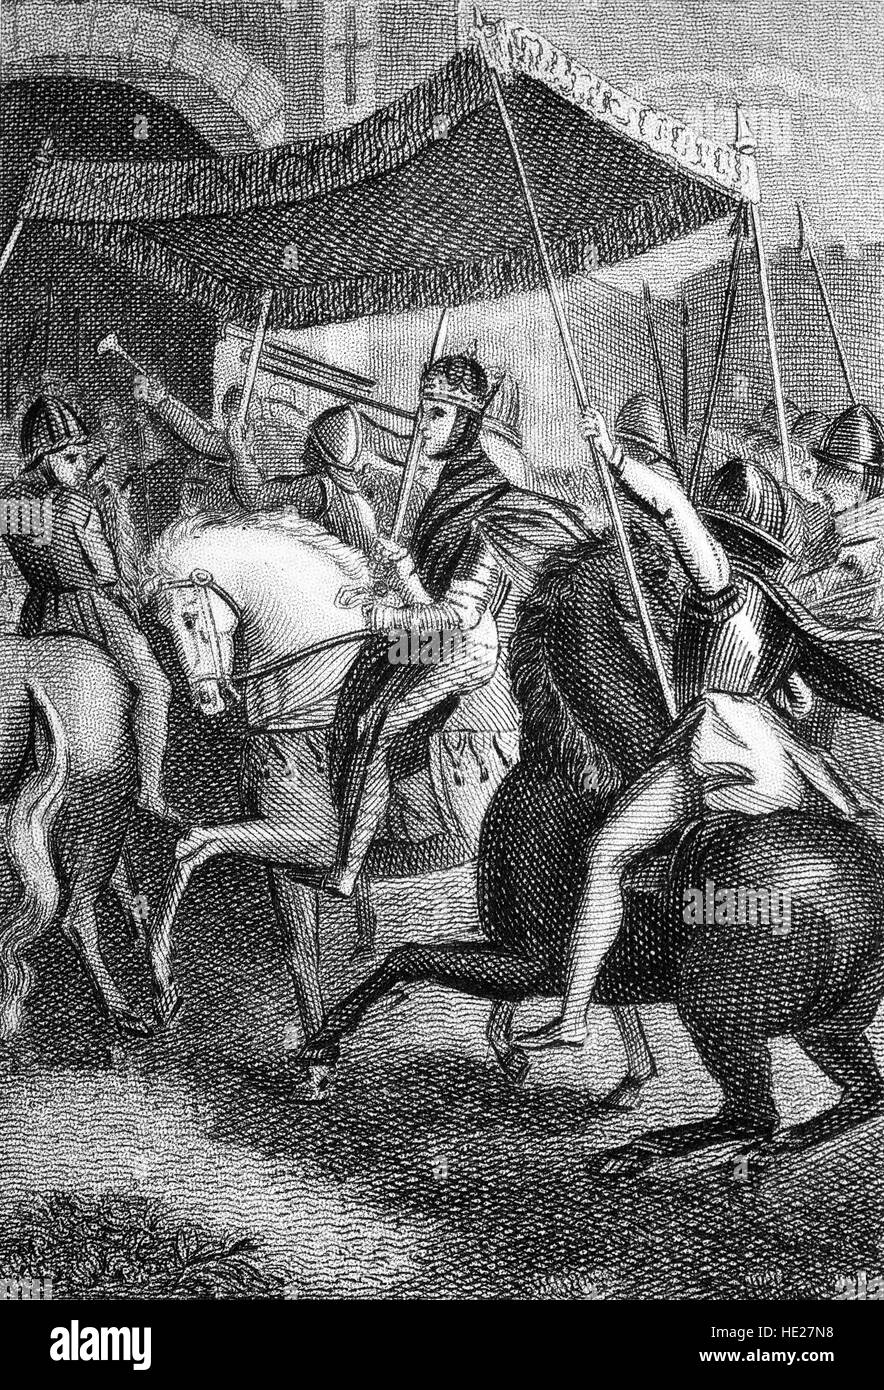 Richard I (1157 – 1199), aka Richard the Lionheart, entering London where he was crowned king in Westminster Abbey on 3 September 1189. Stock Photo